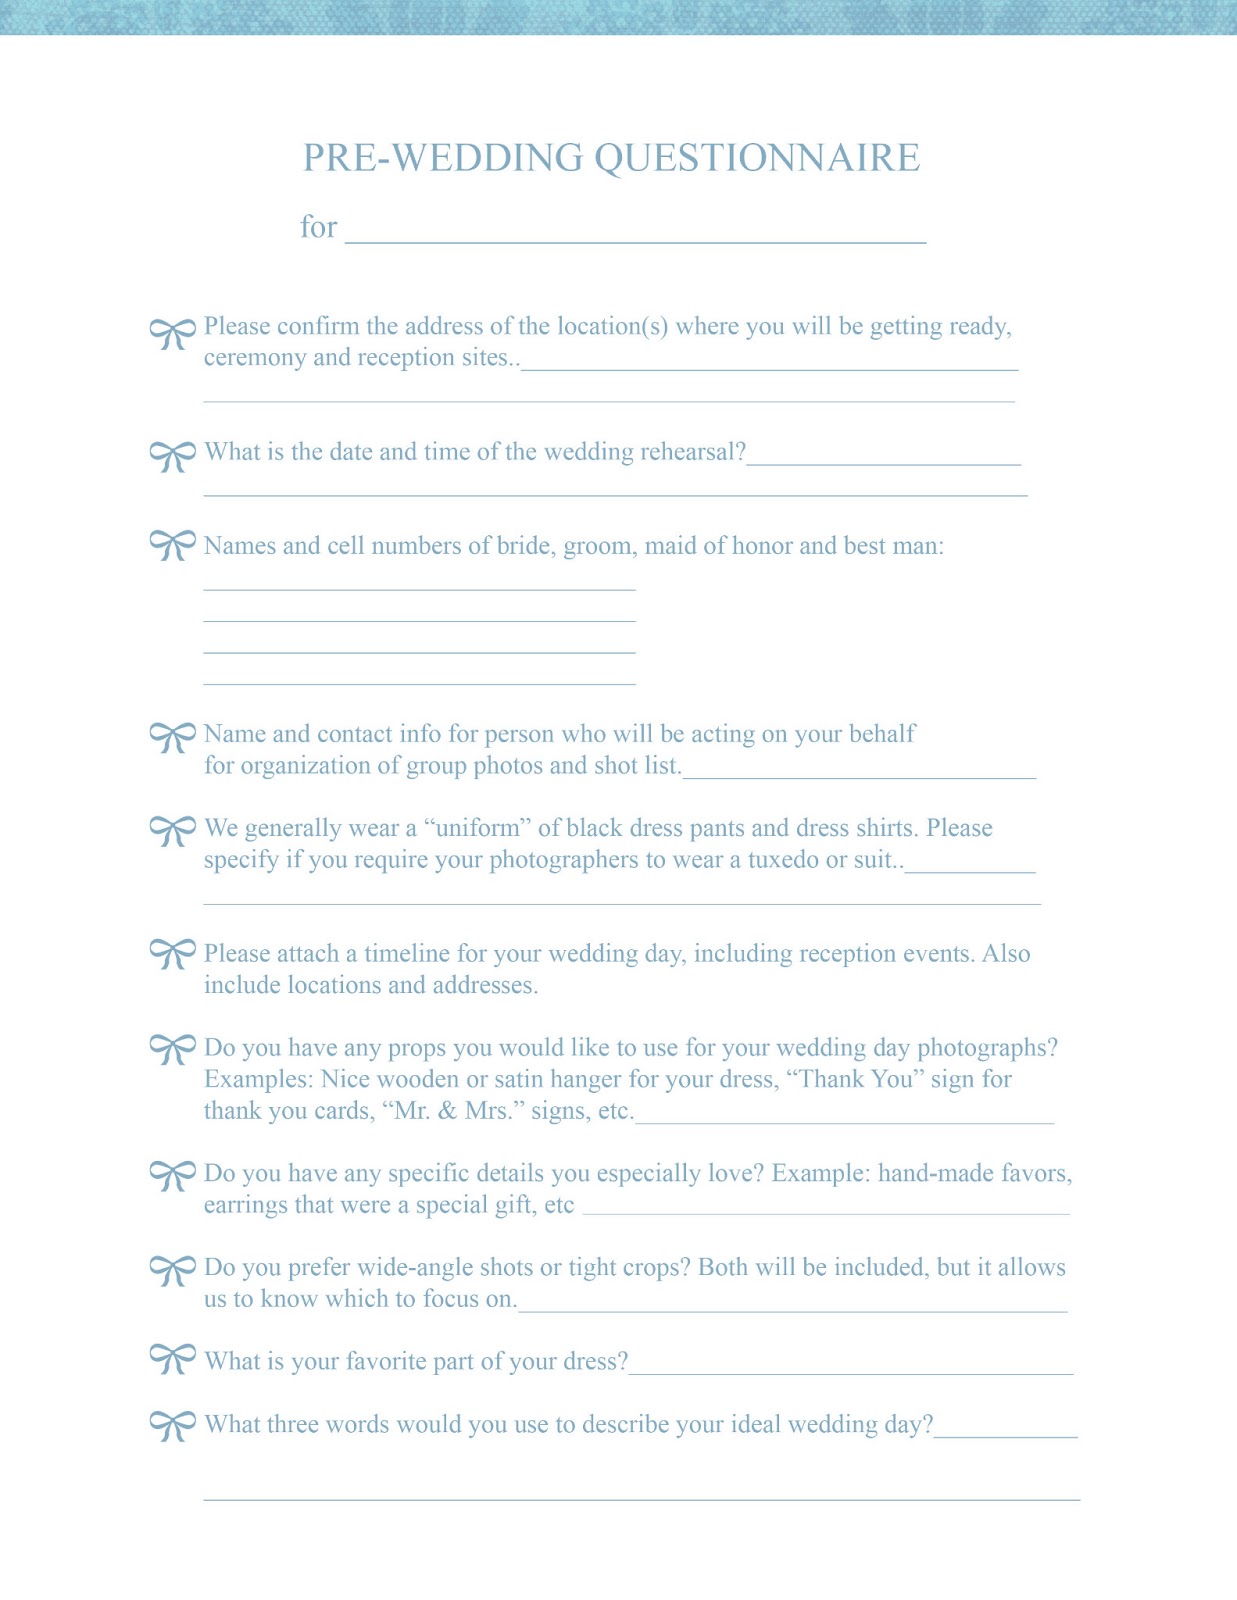 Free Wedding Photography Questionnaire Template